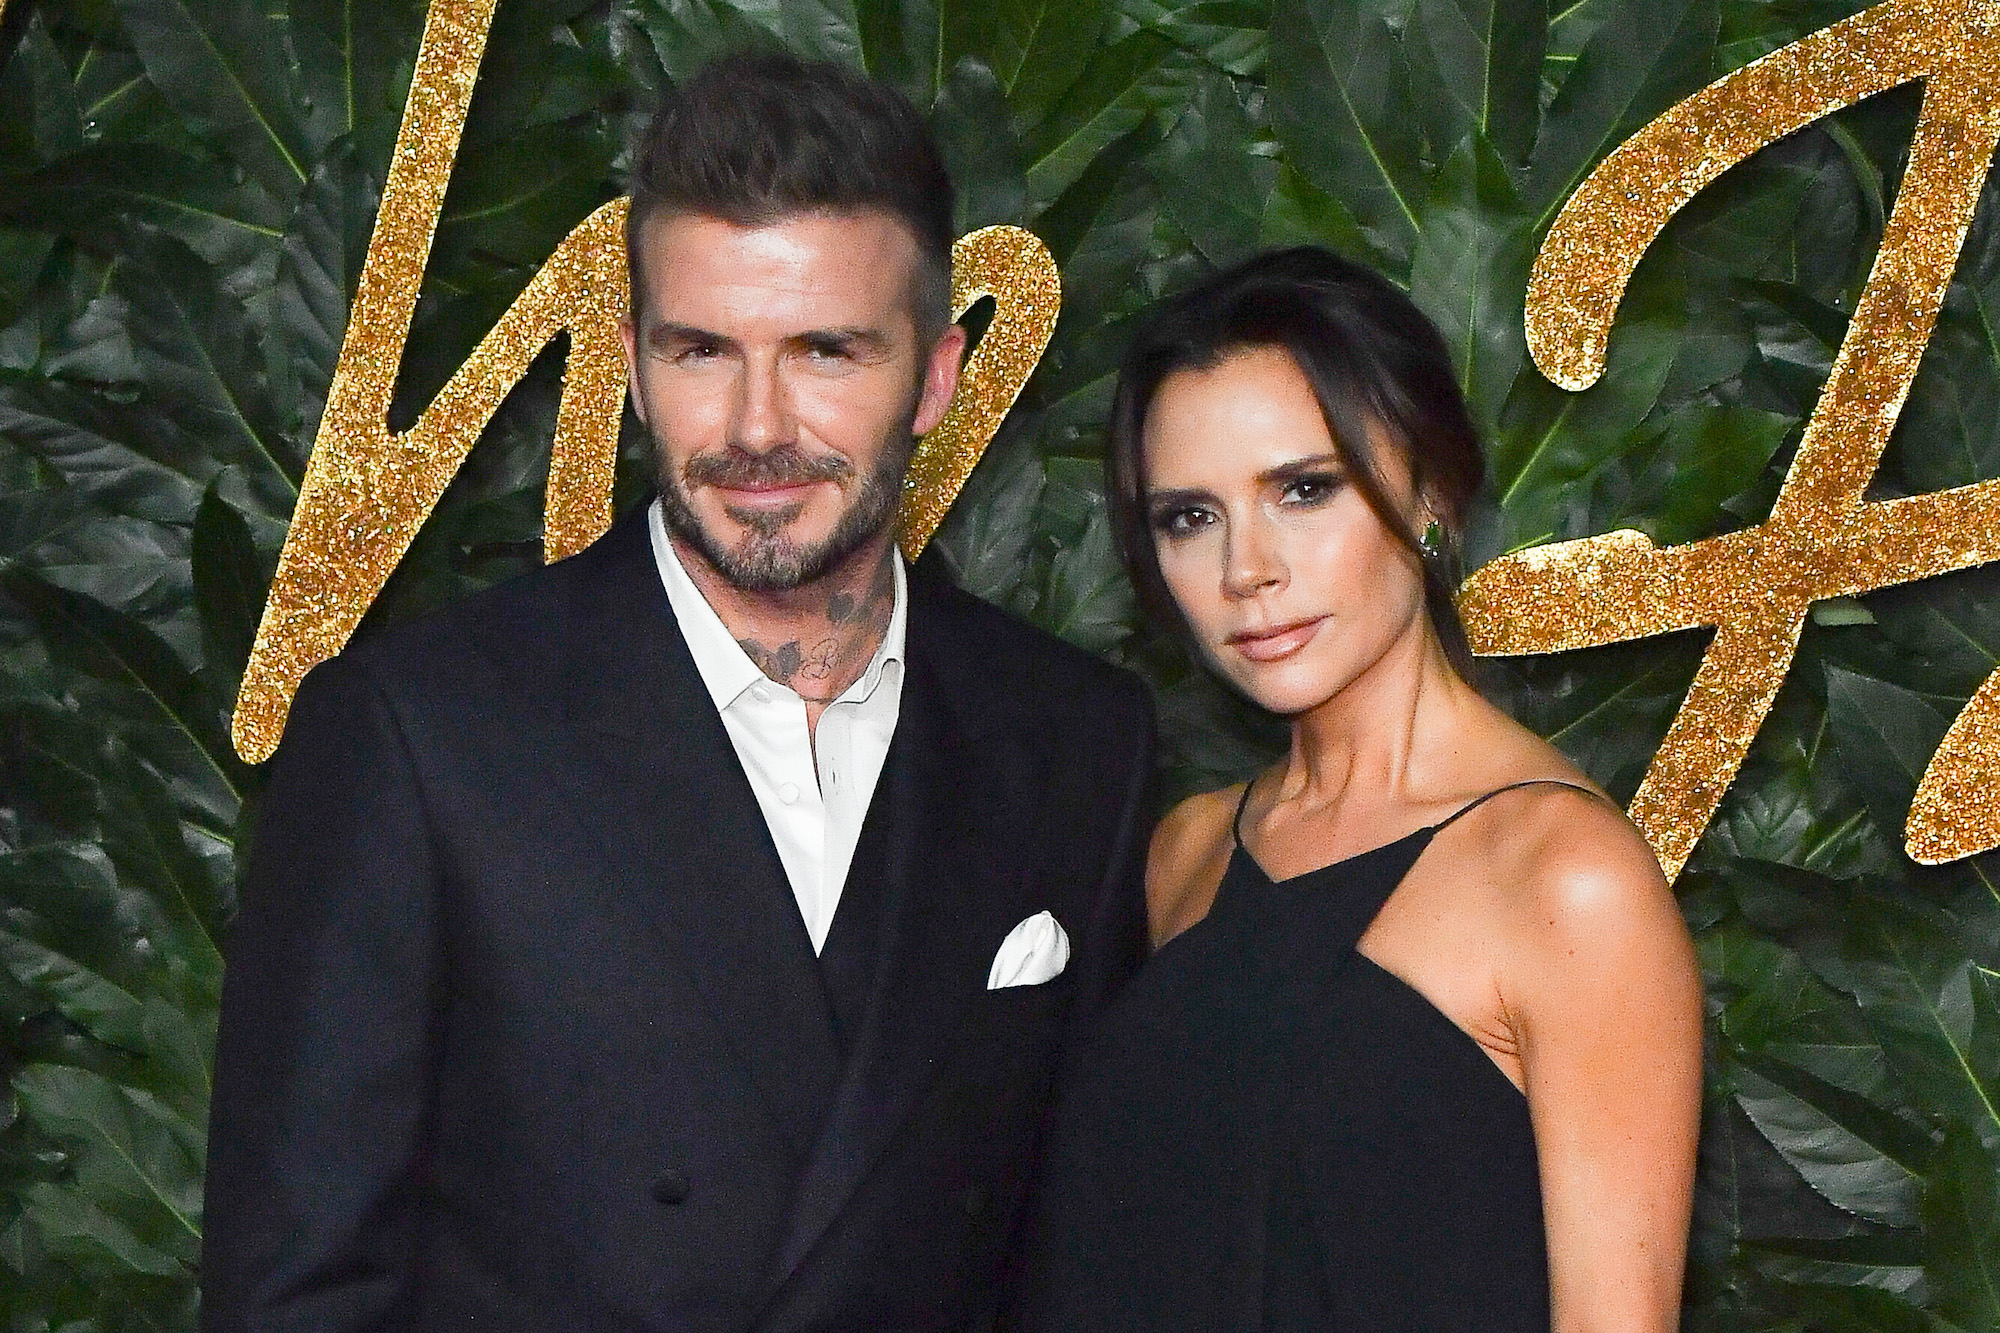 David and Victoria Beckham attending the 2018 Fashion Awards in London, England